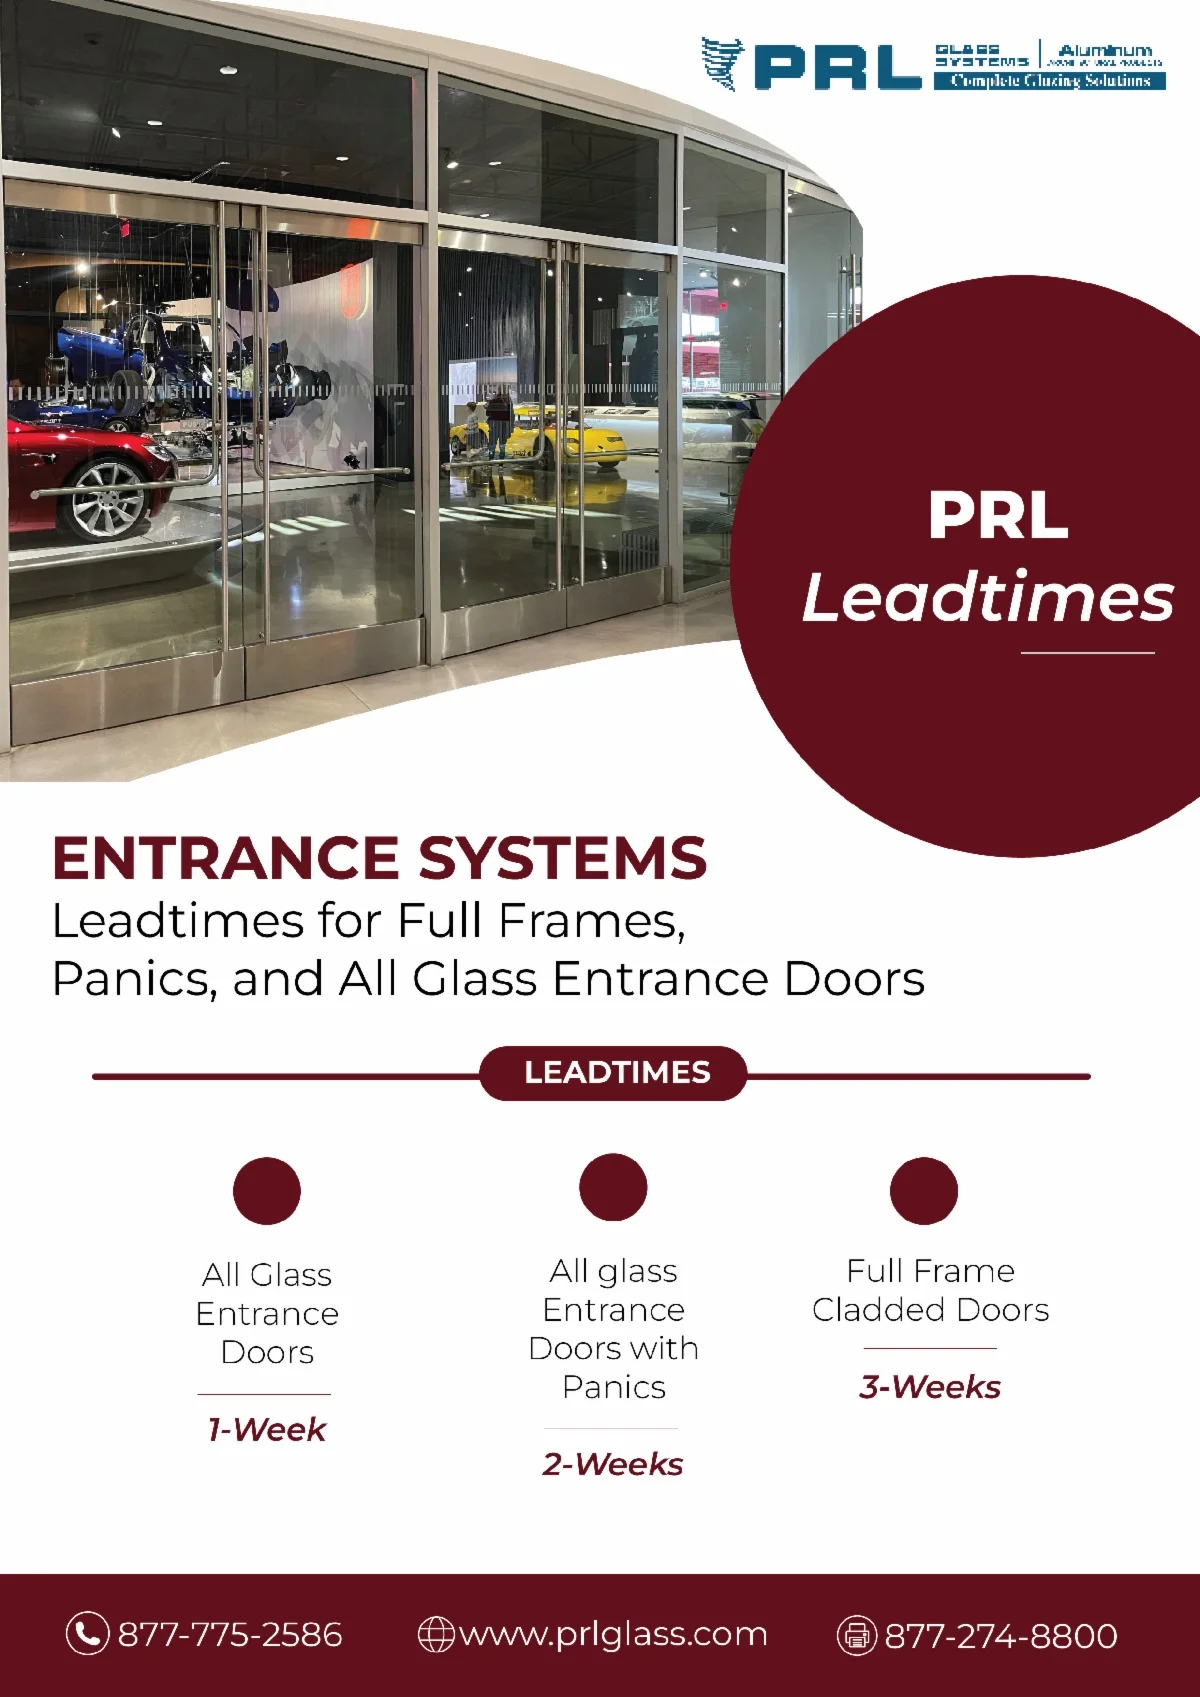 Meet Your Deadlines! Get Your Entrance Systems ASAP at PRL!